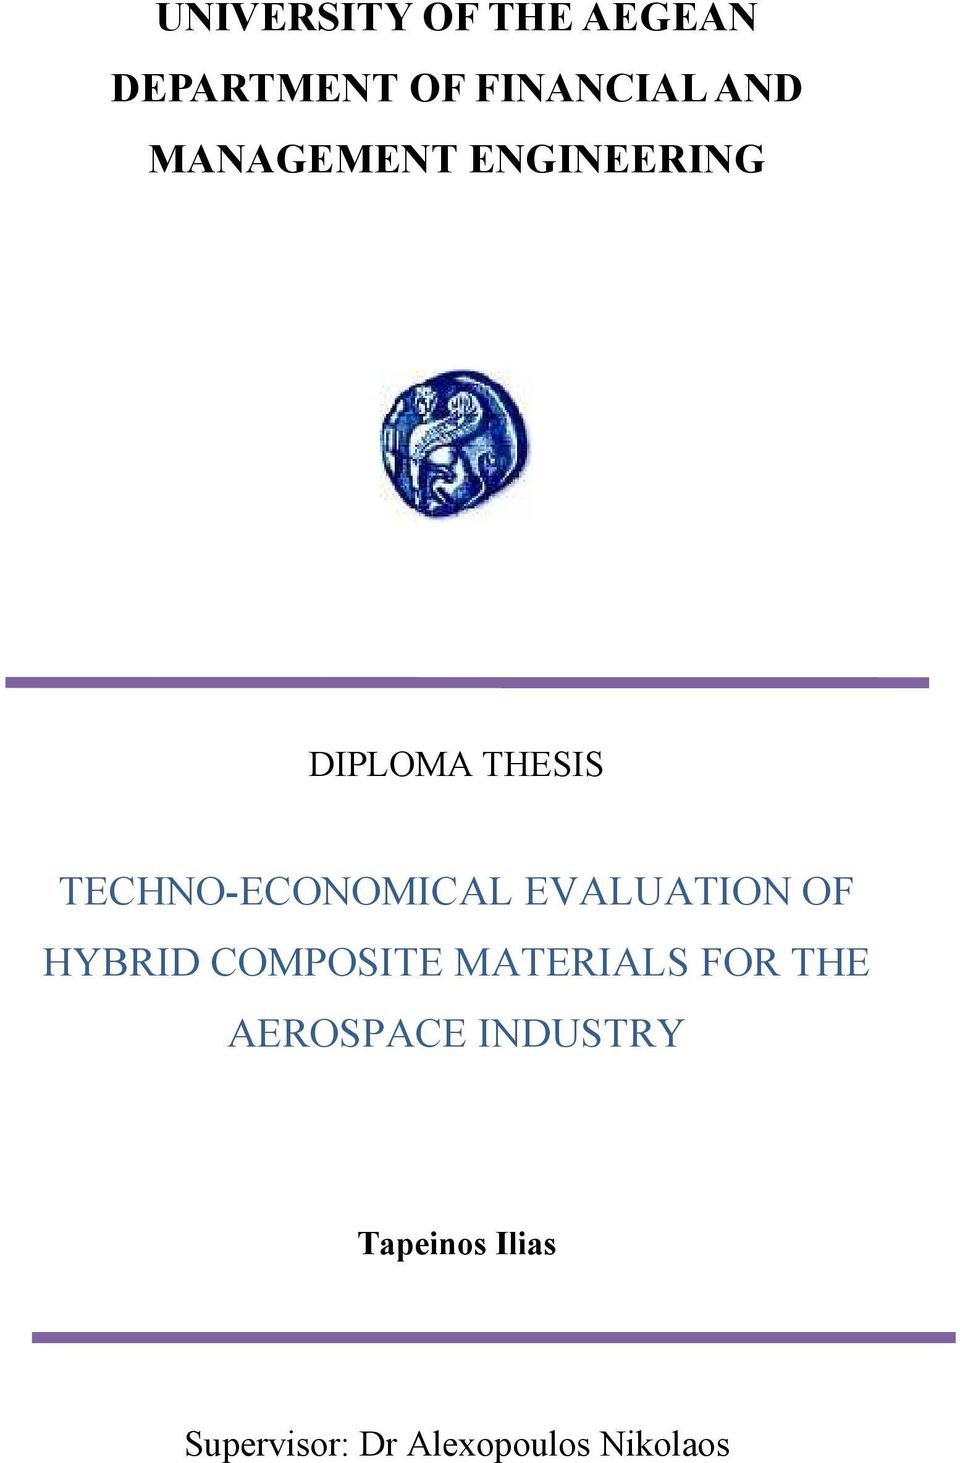 EVALUATION OF HYBRID COMPOSITE MATERIALS FOR THE